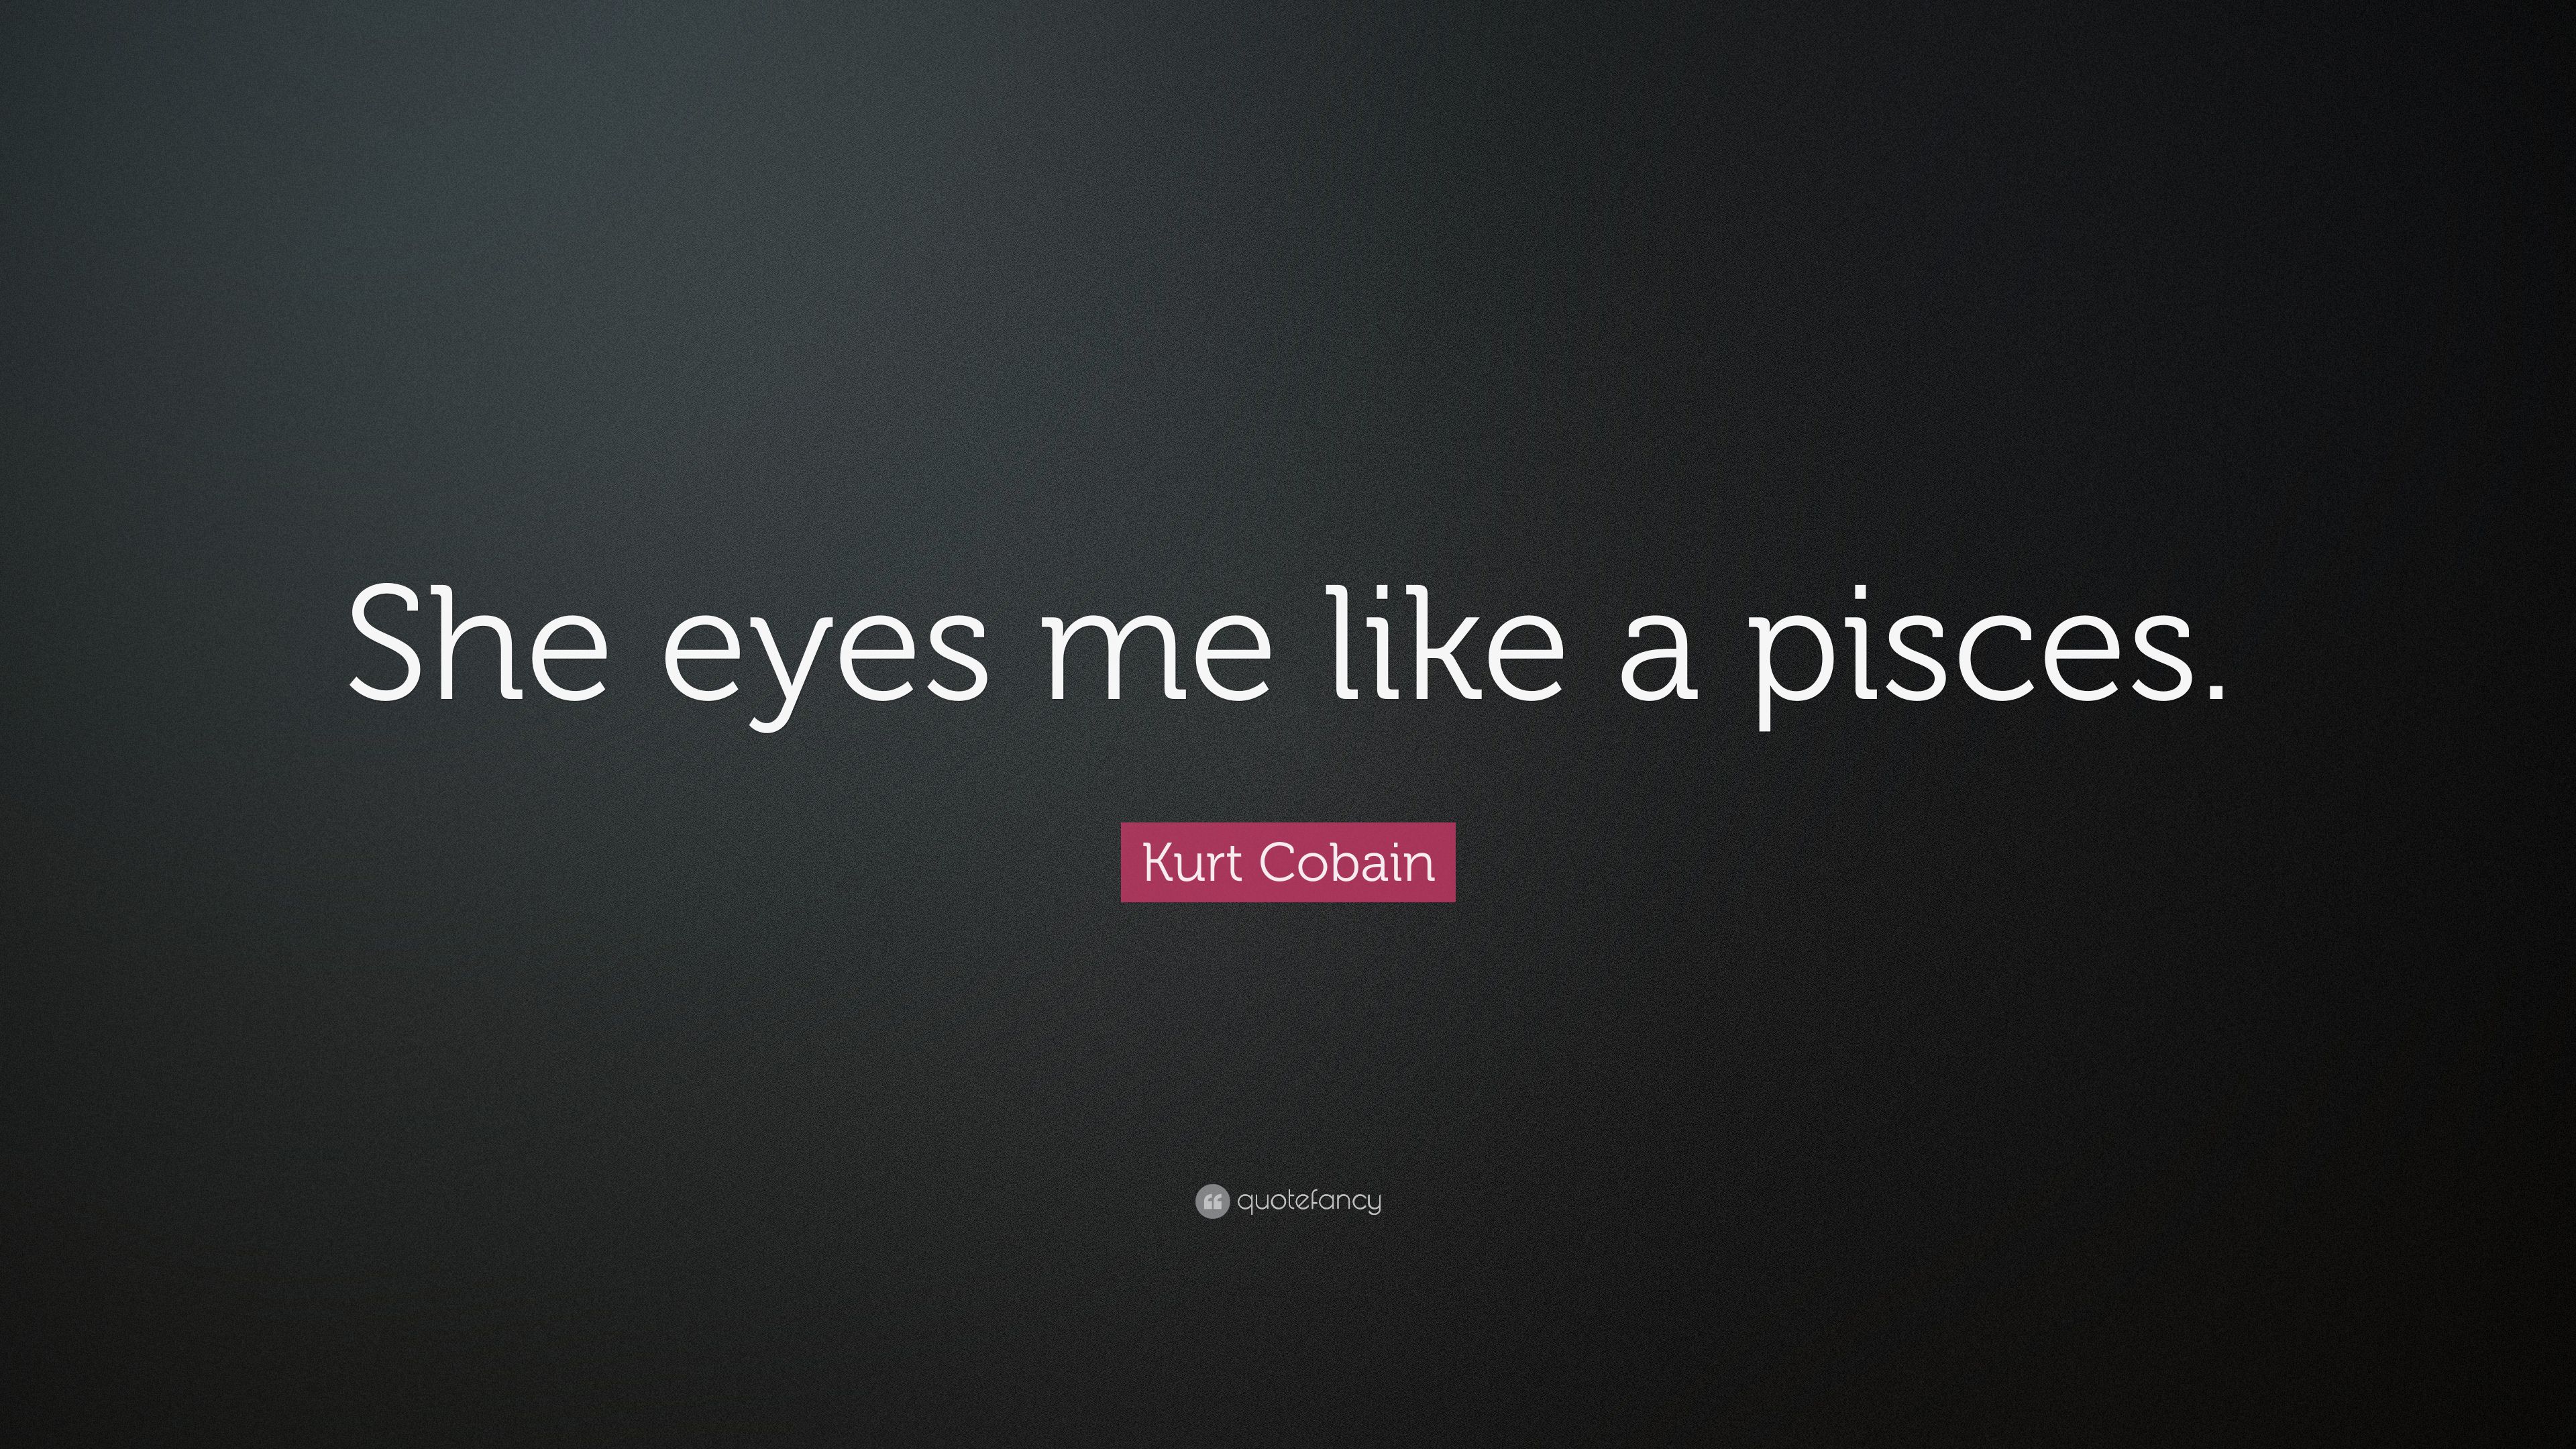 Kurt Cobain Quote: “She eyes me like a pisces.” 12 wallpaper